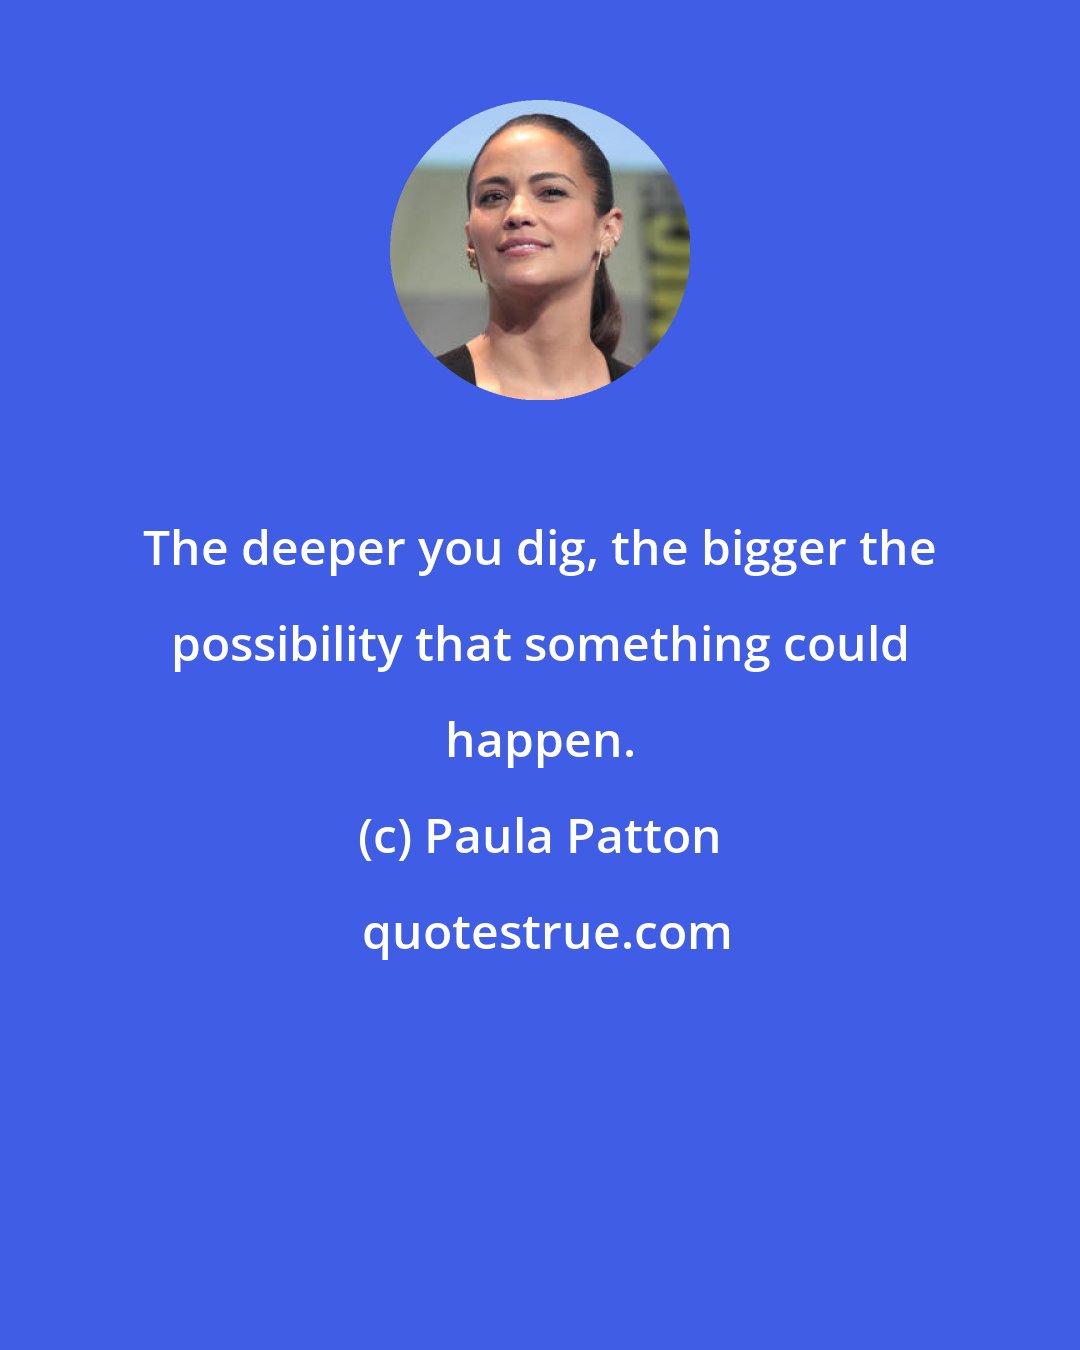 Paula Patton: The deeper you dig, the bigger the possibility that something could happen.